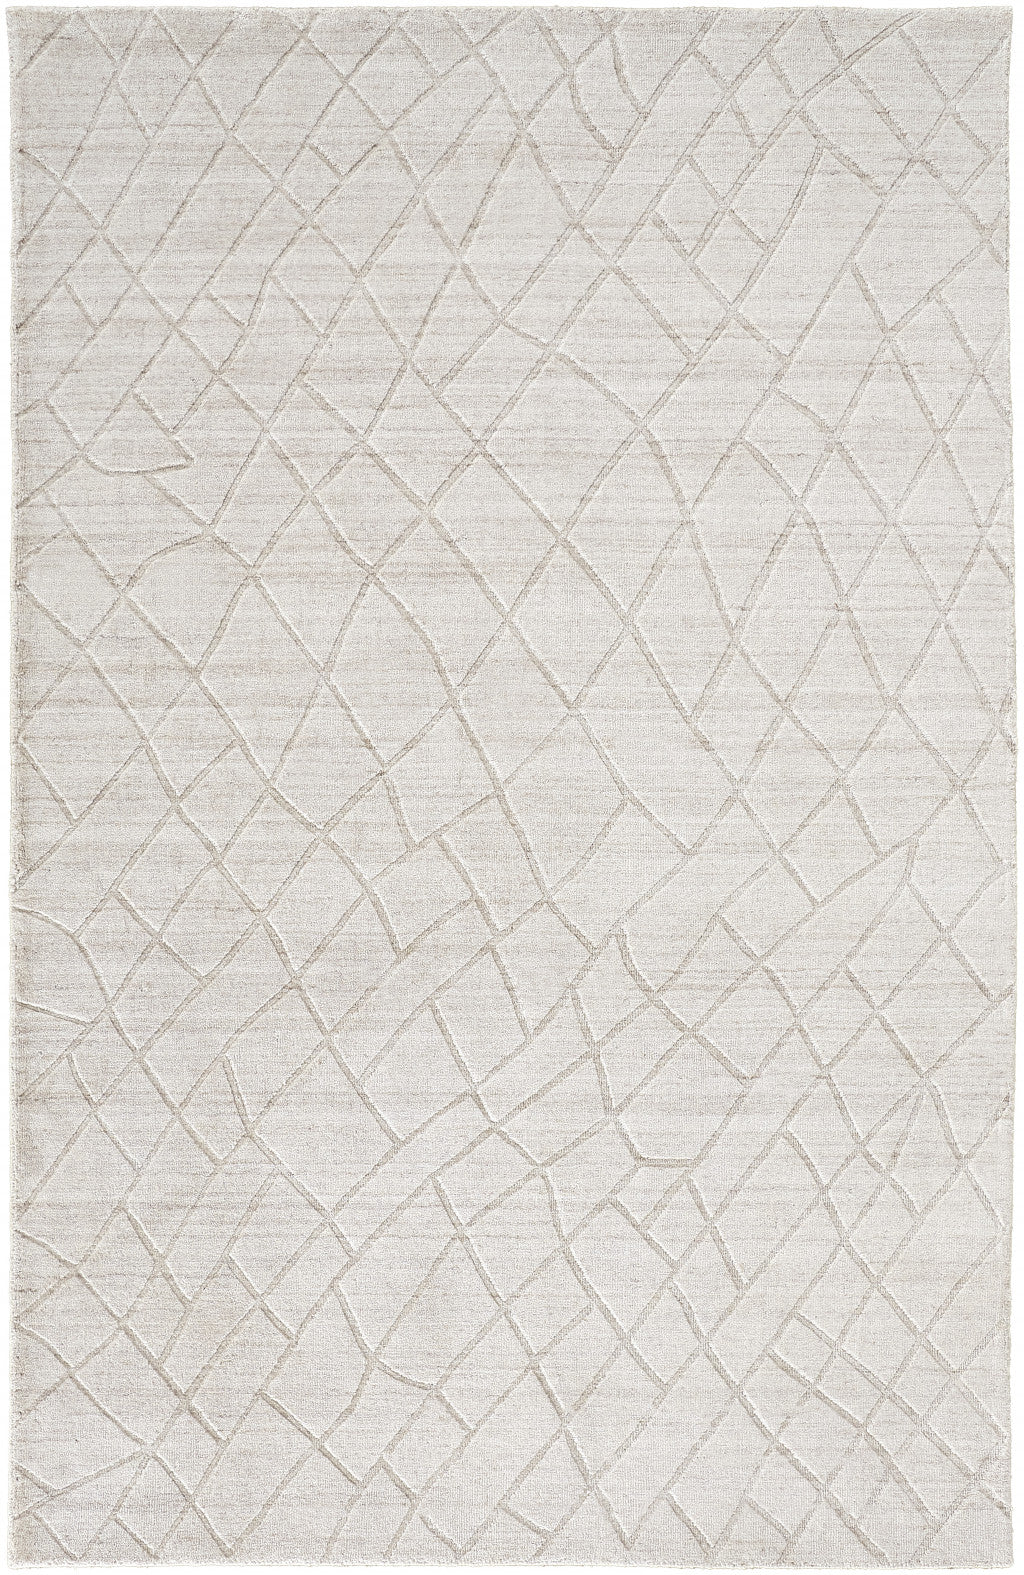 4' X 6' Ivory And Gray Striped Hand Woven Area Rug